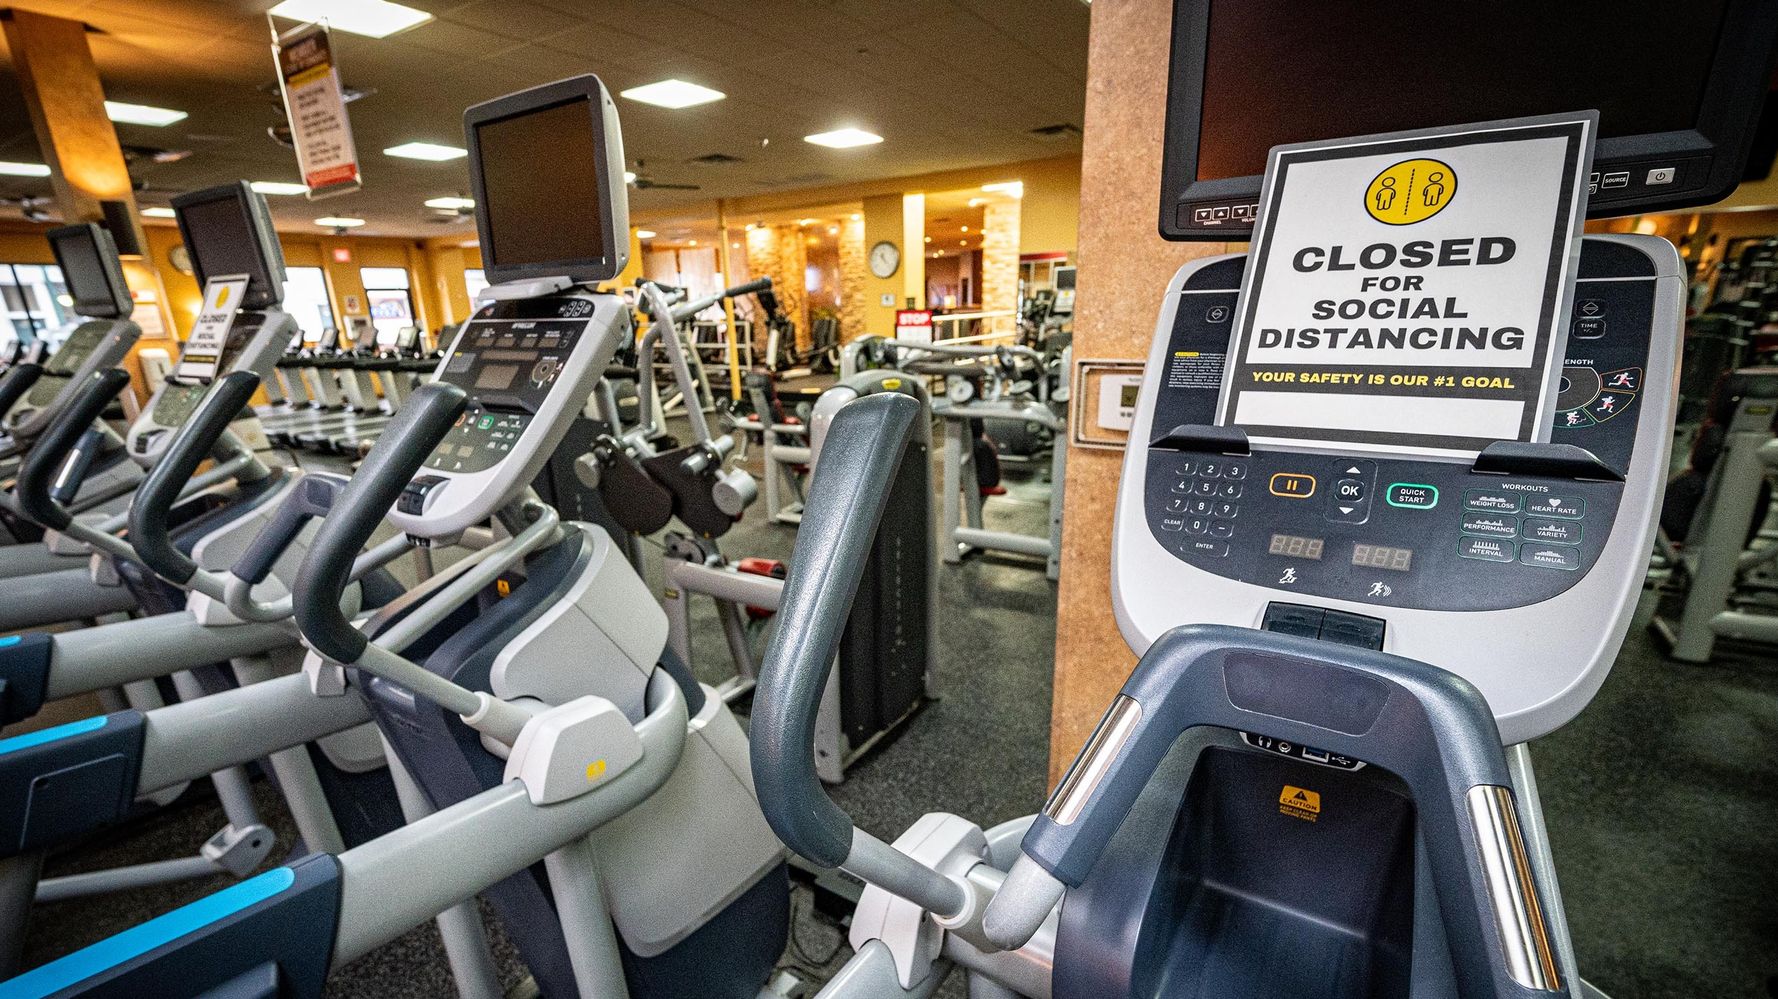 CDC urges stricter gym precautions after COVID-19 outbreaks linked to facilities